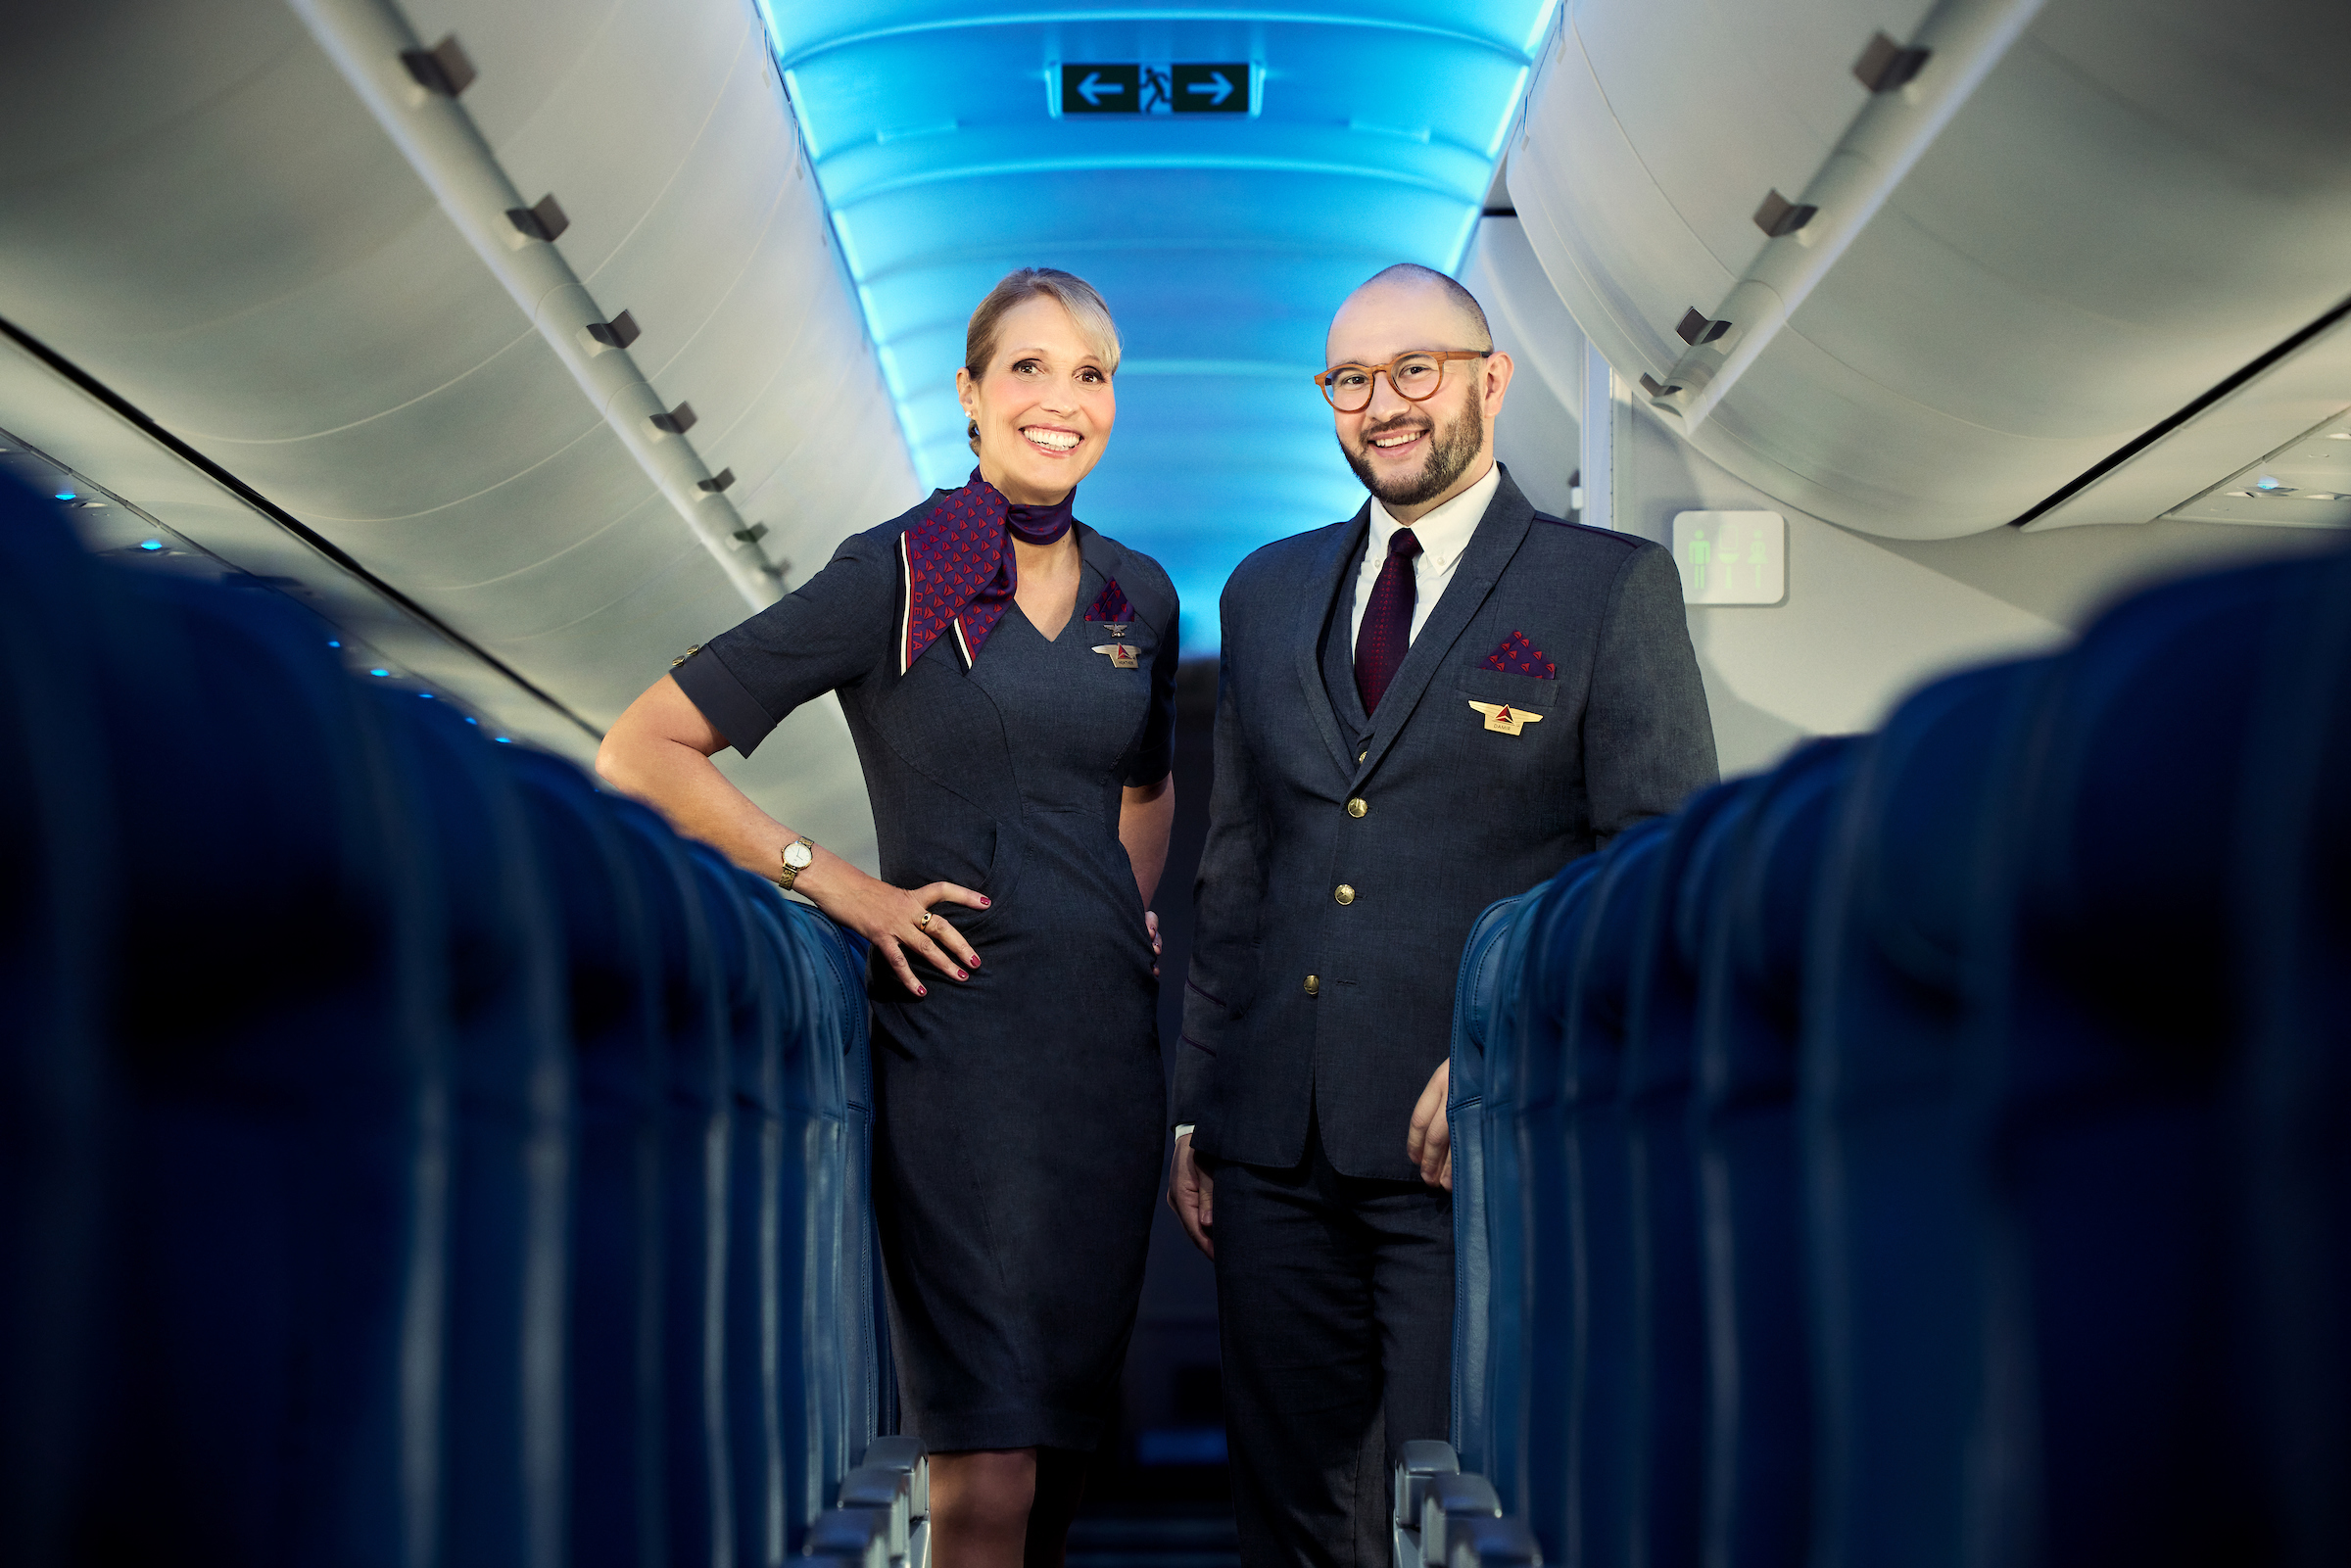 Do Flight Attendants Ever Work With The Same Crew?